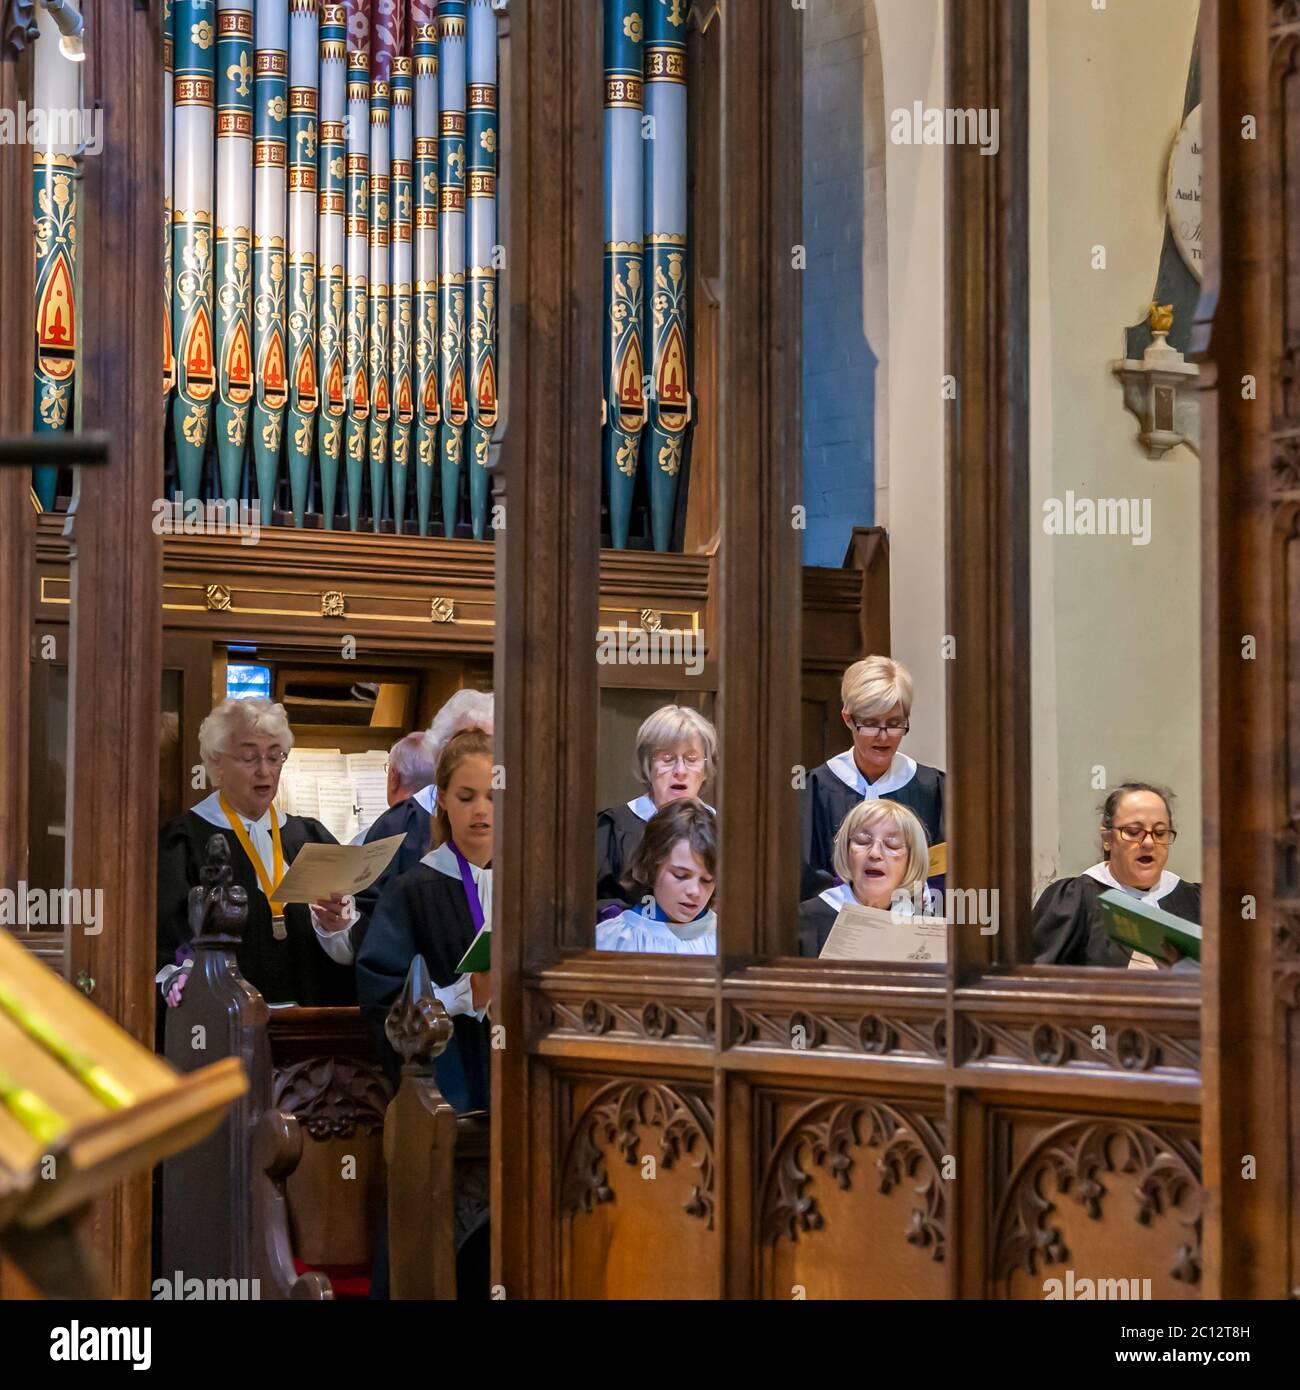 The church choir sings in front of the organ. British Wedding in South Cambridgeshire, England Stock Photo